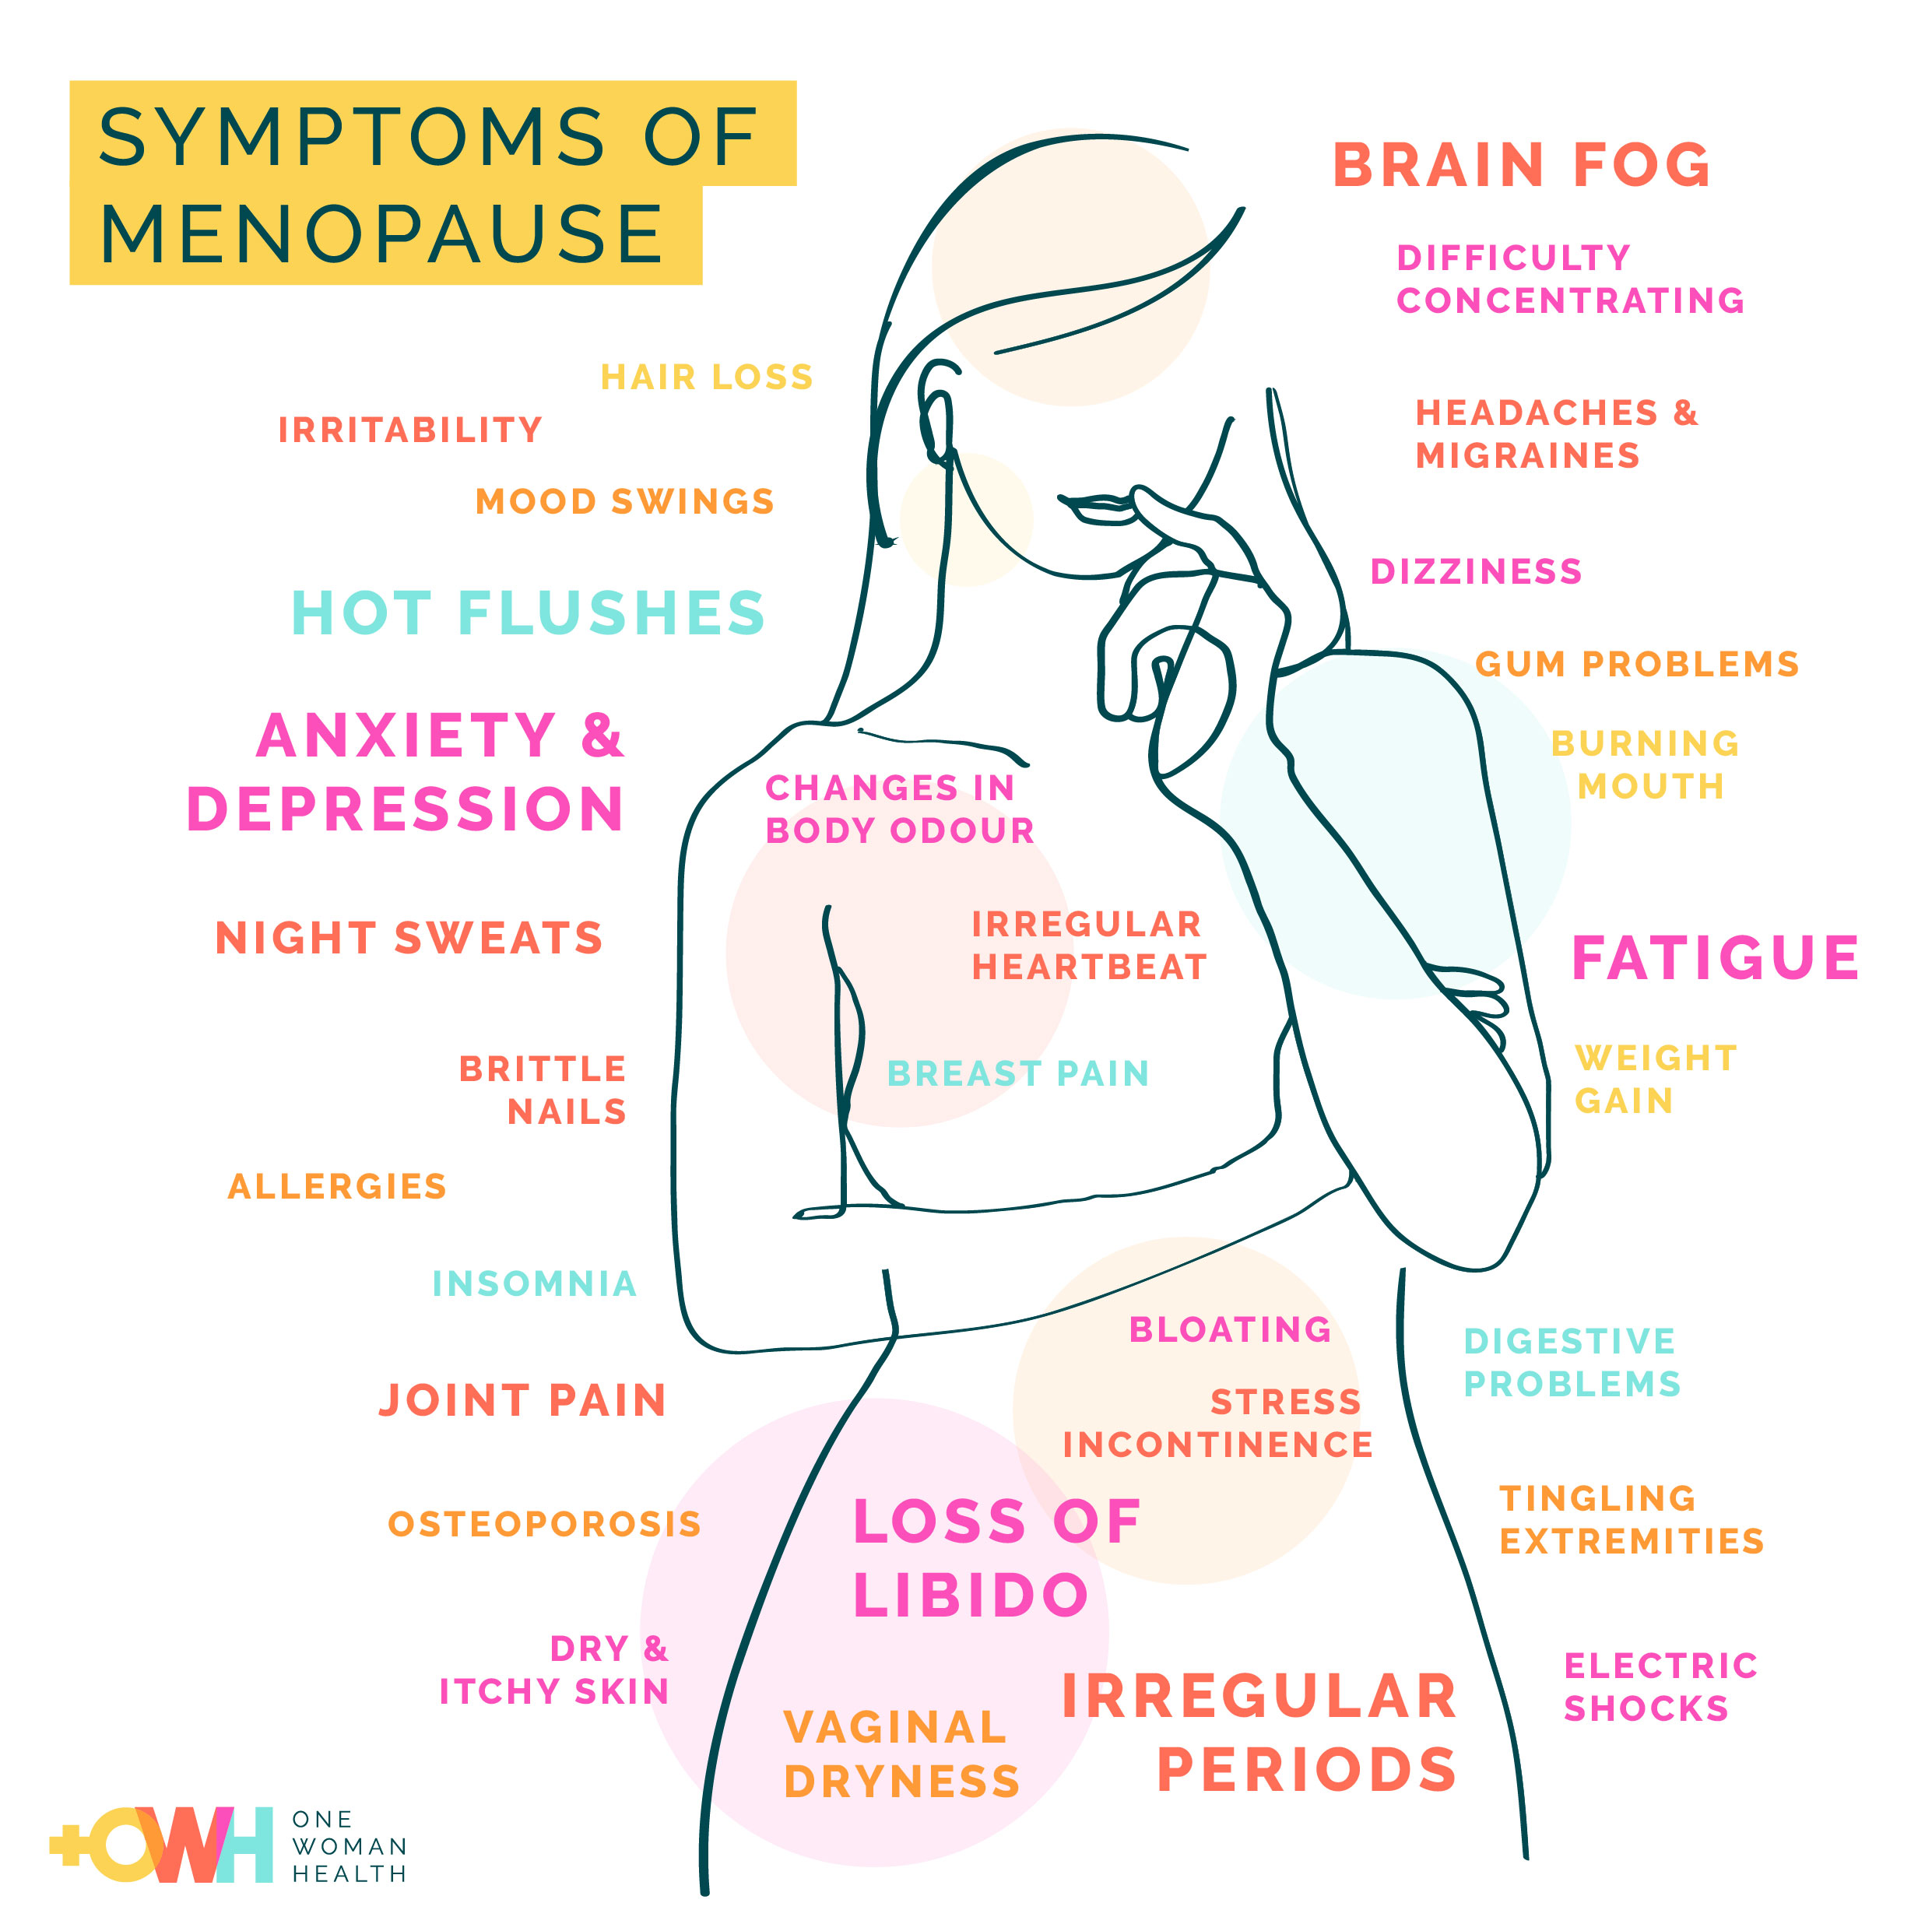 What are the symptoms of the menopause?